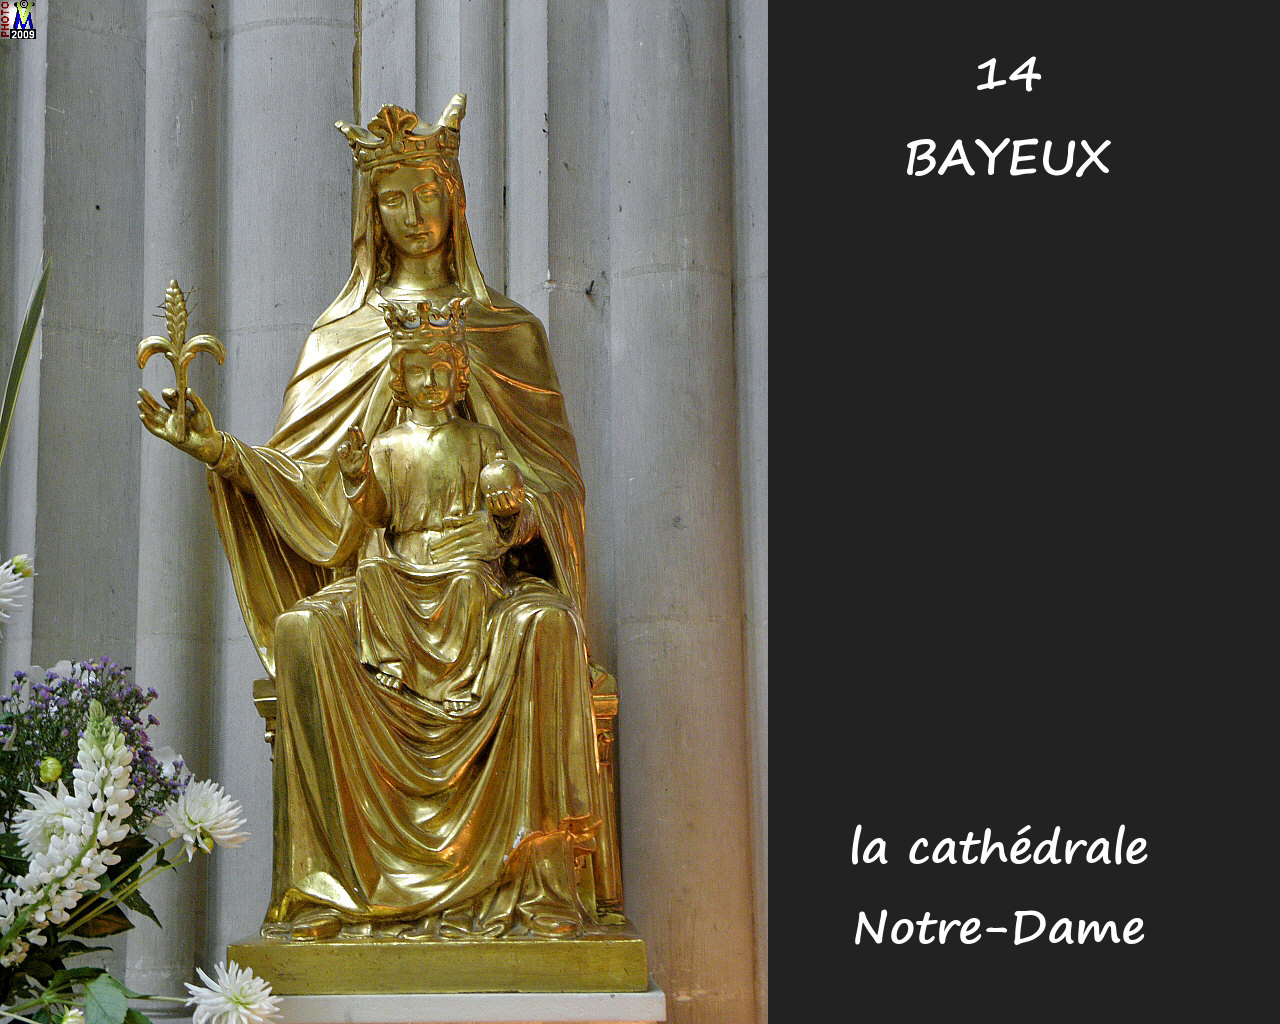 14BAYEUX_cathedrale_264.jpg